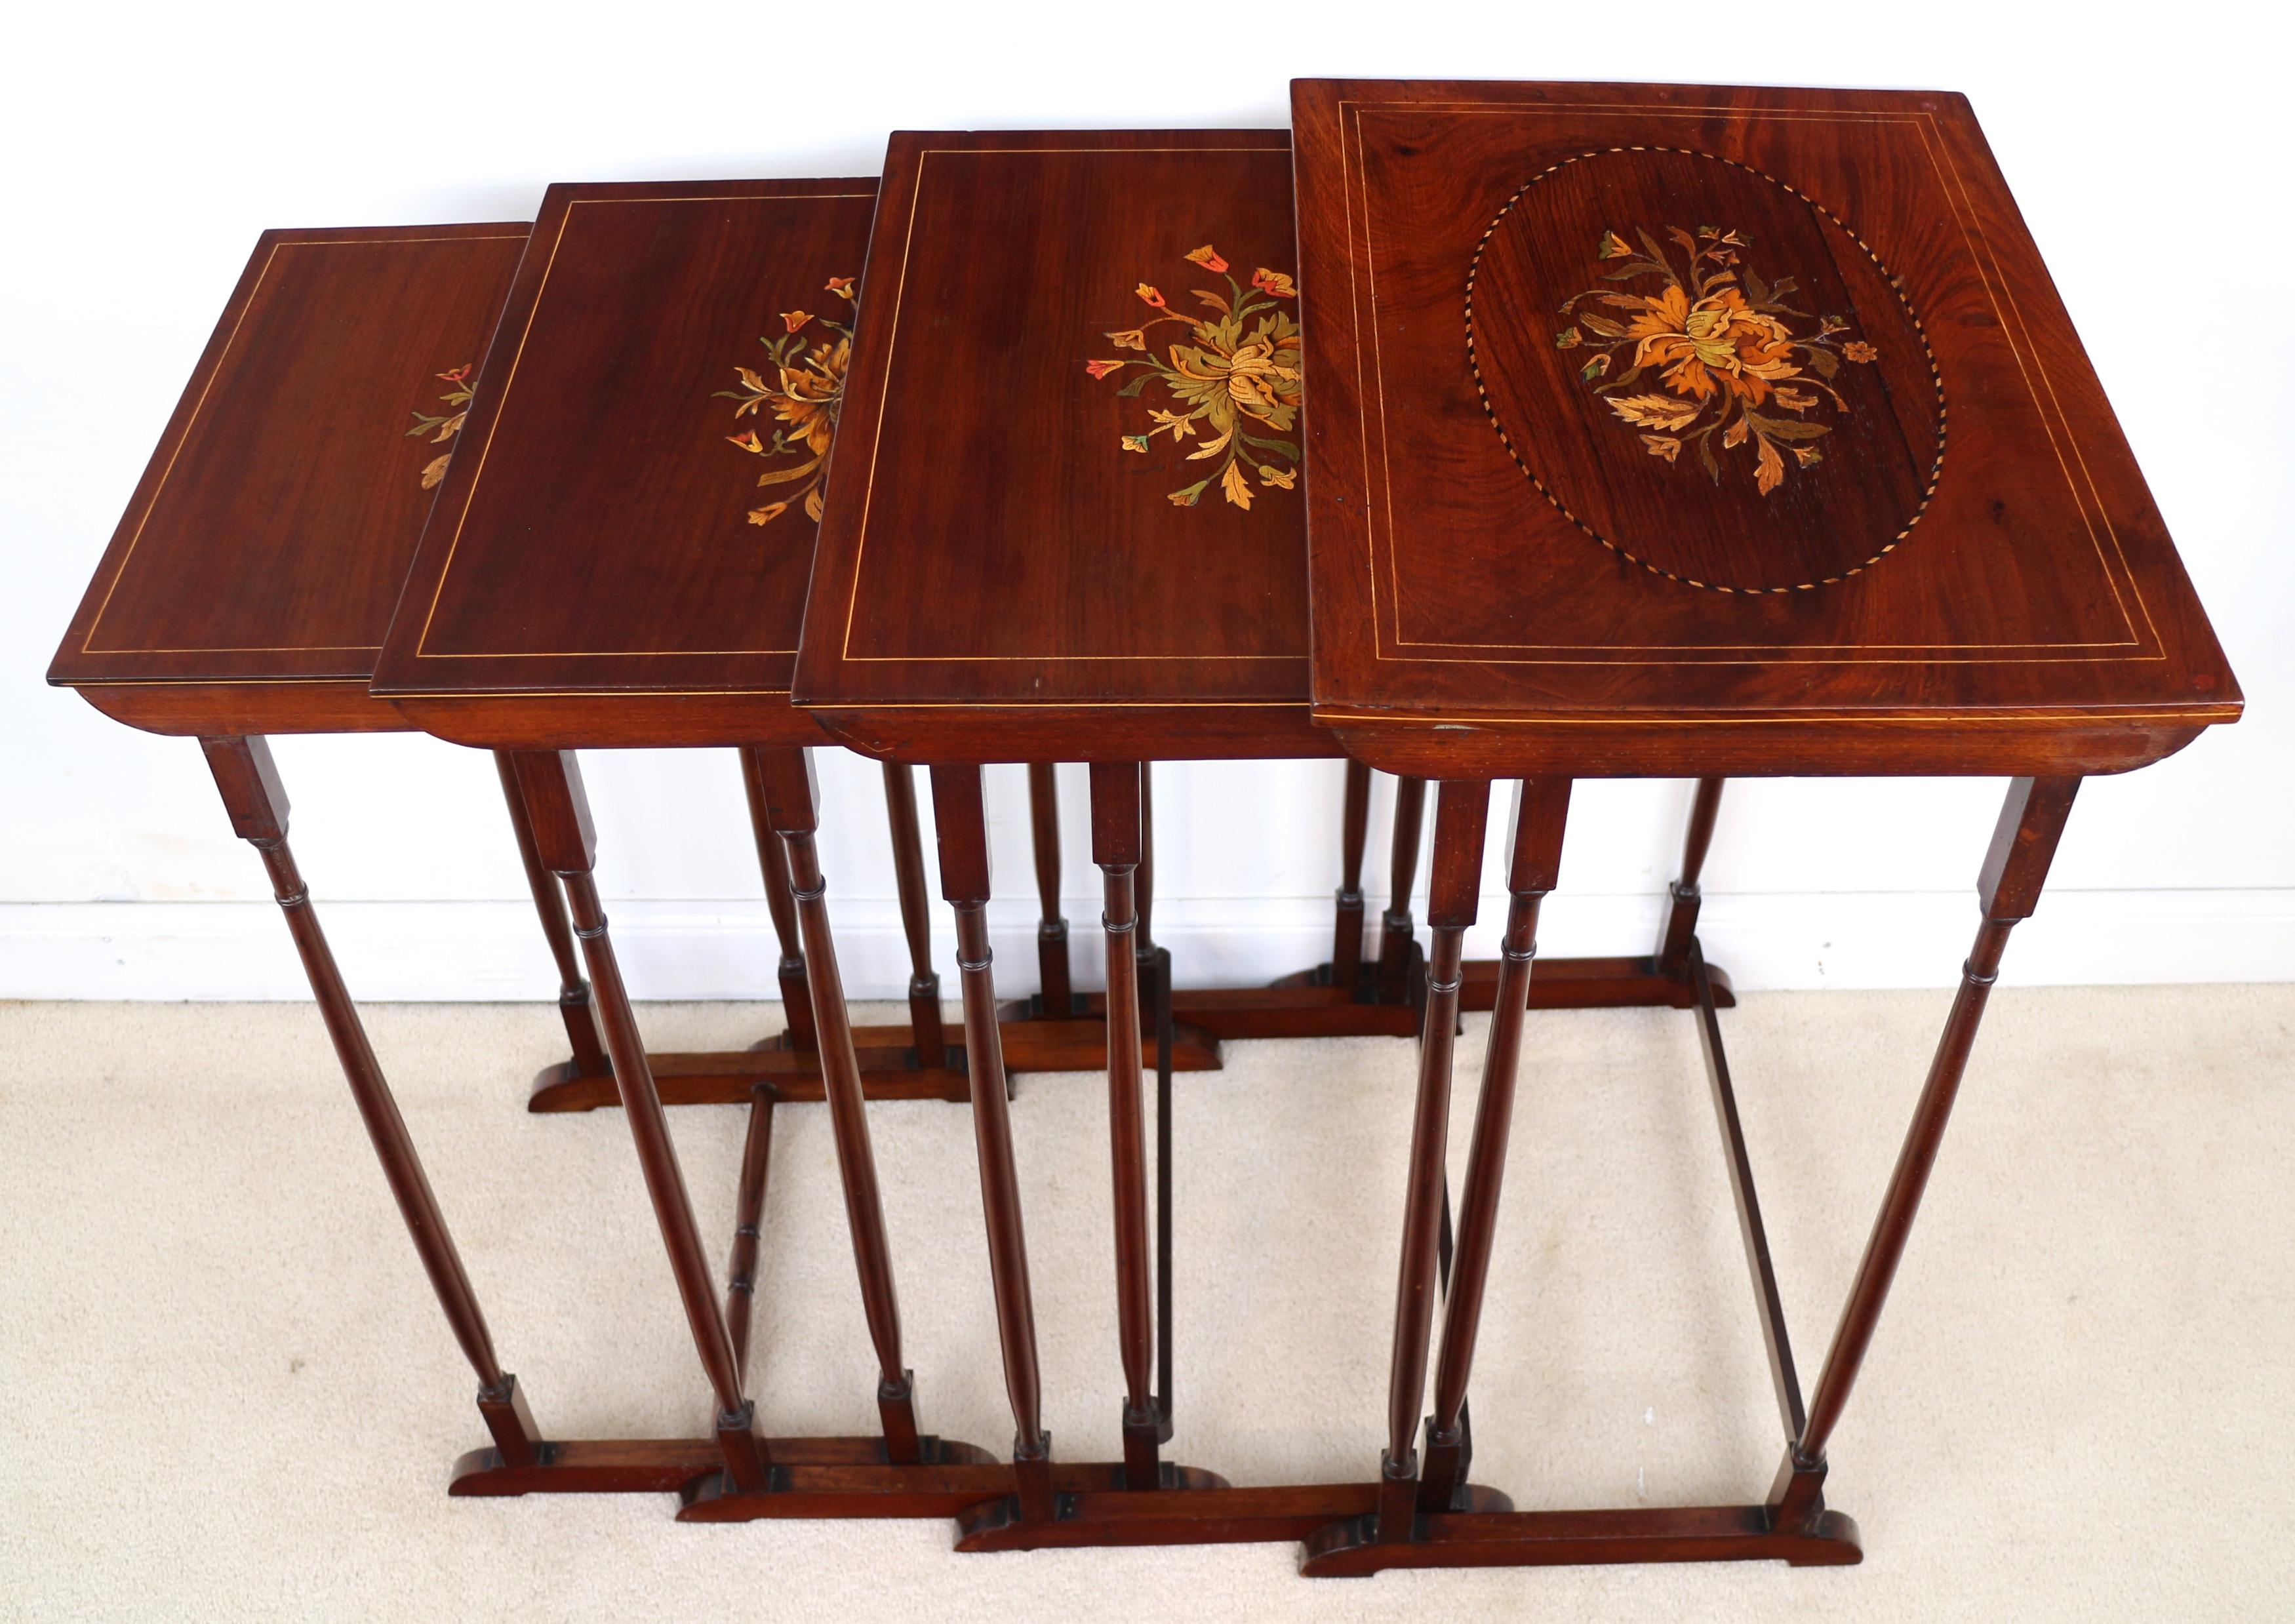 Set of Antique English Victorian Mahogany and Marquetry Inlaid Quartetto Tables For Sale 1